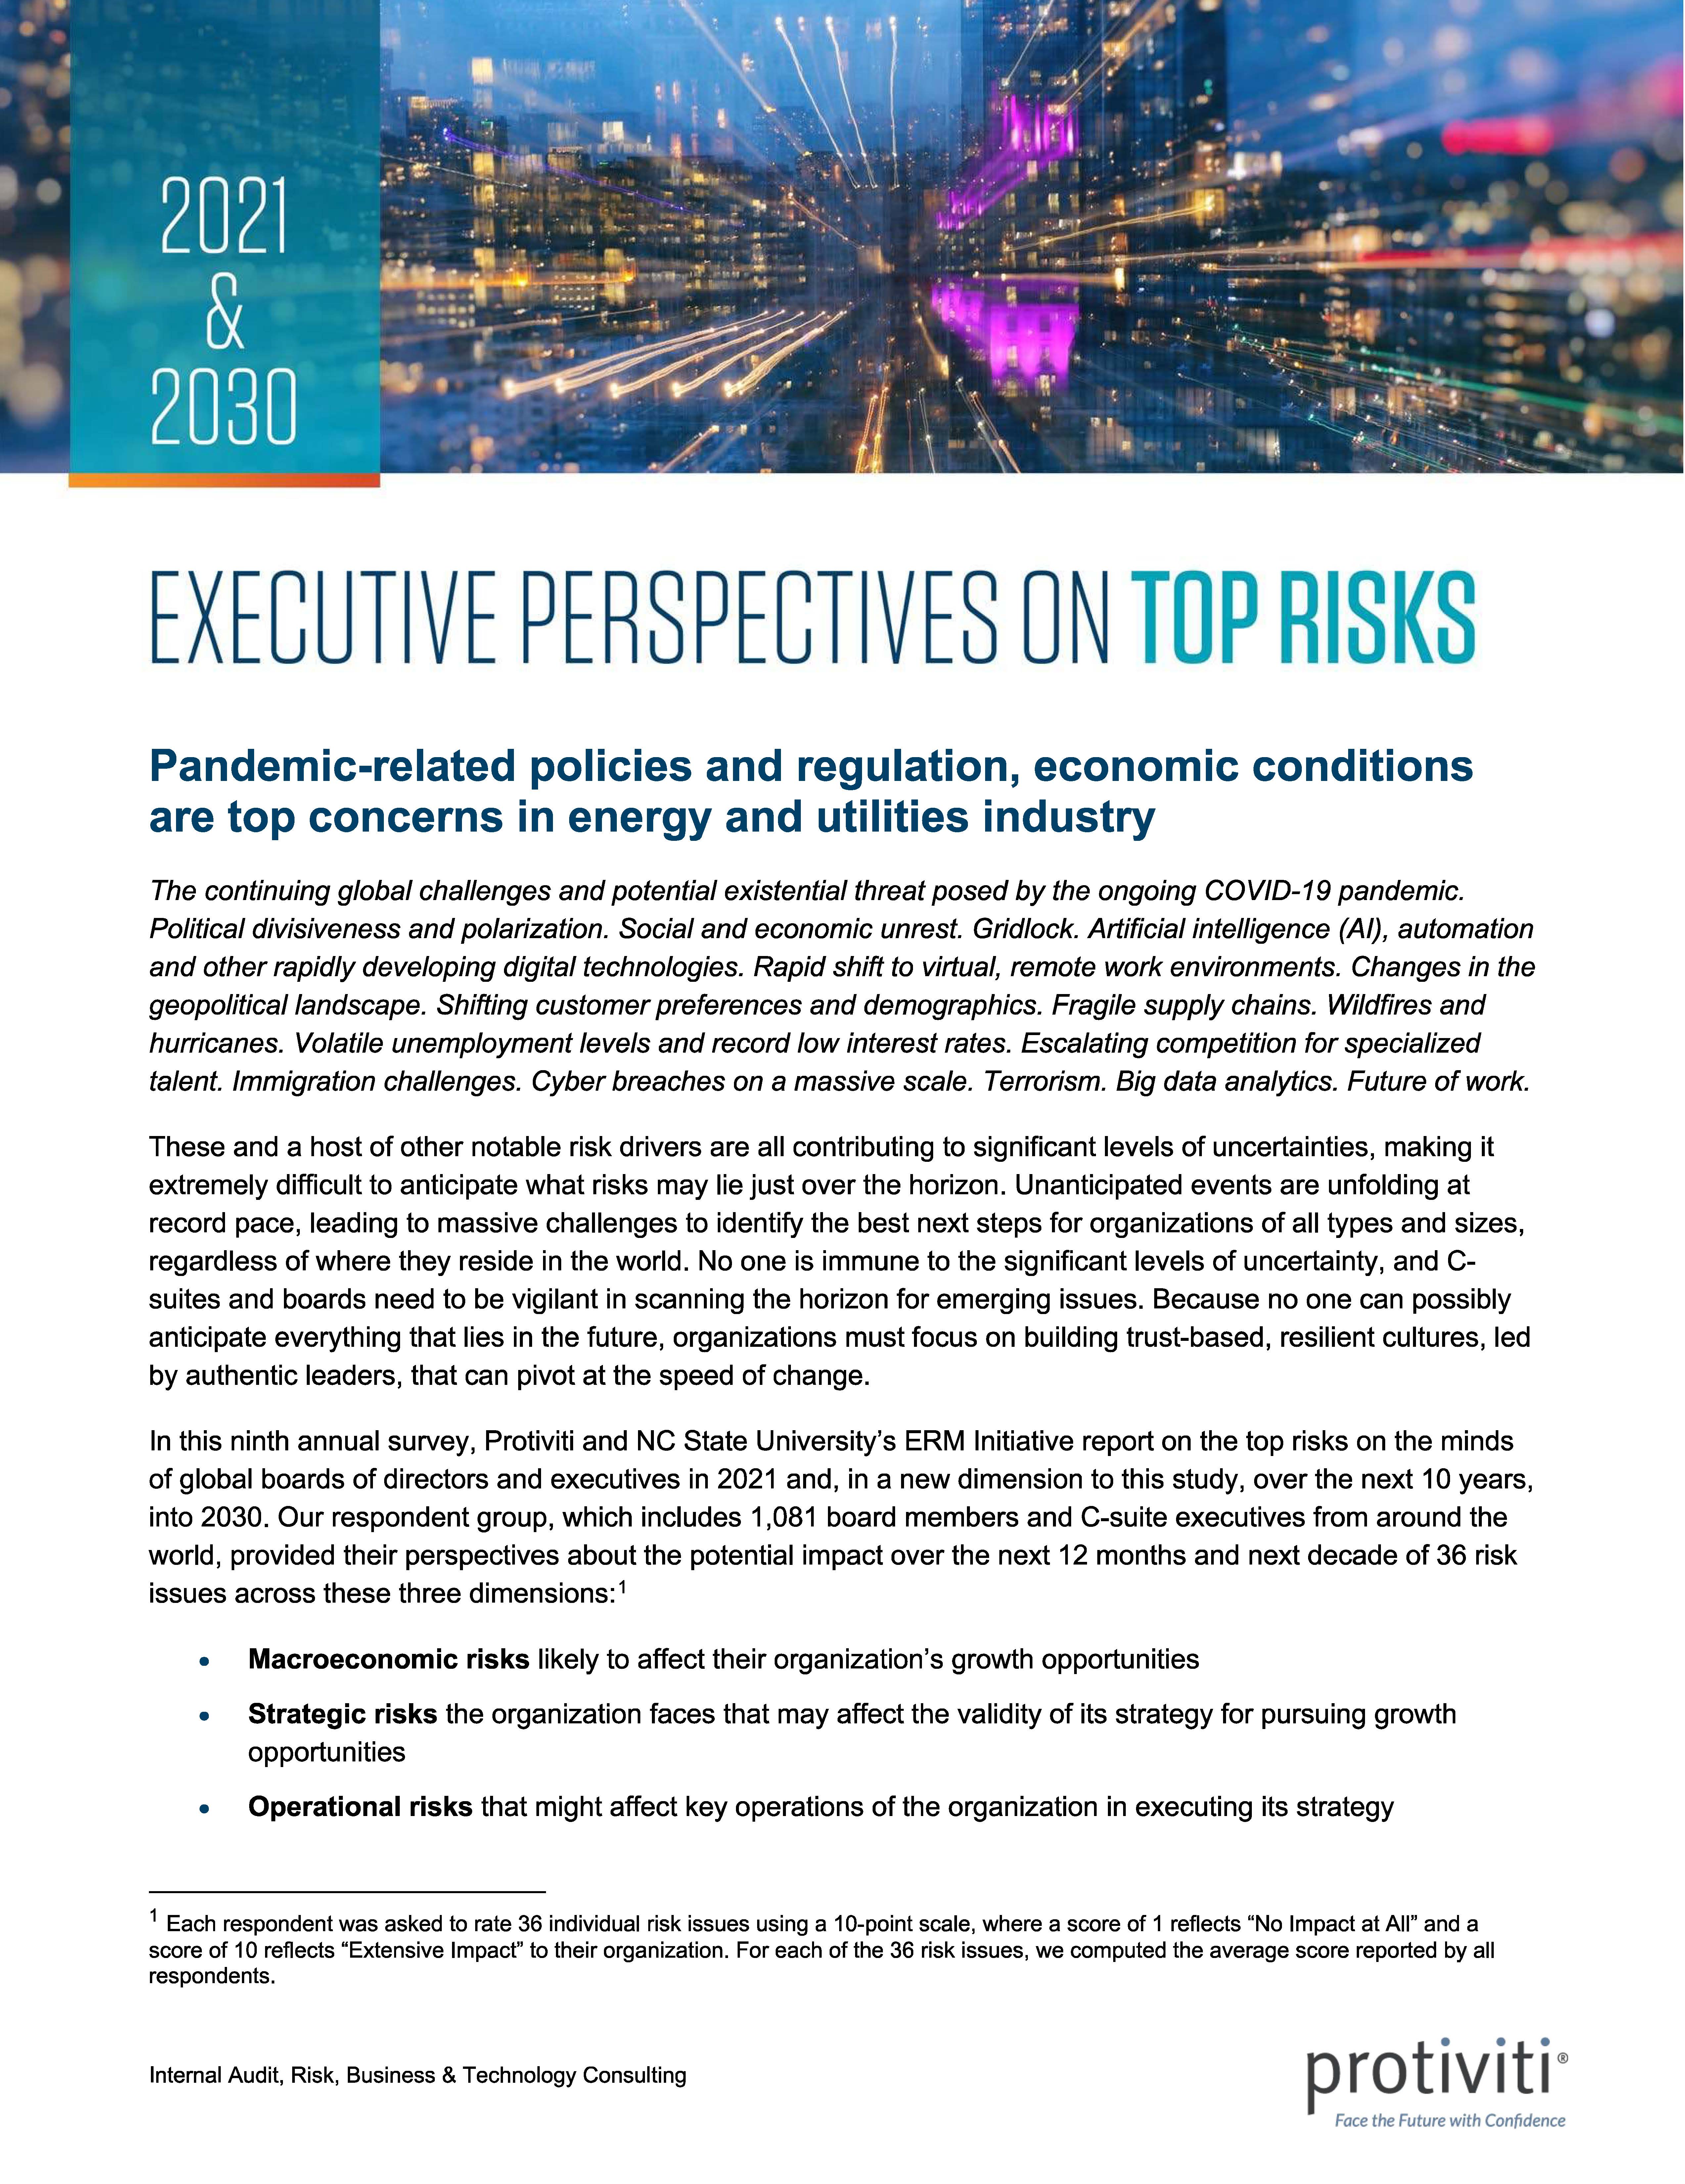 Screenshot of the first page of Executive Perspectives on Top Risks - Energy and Utilities Industry